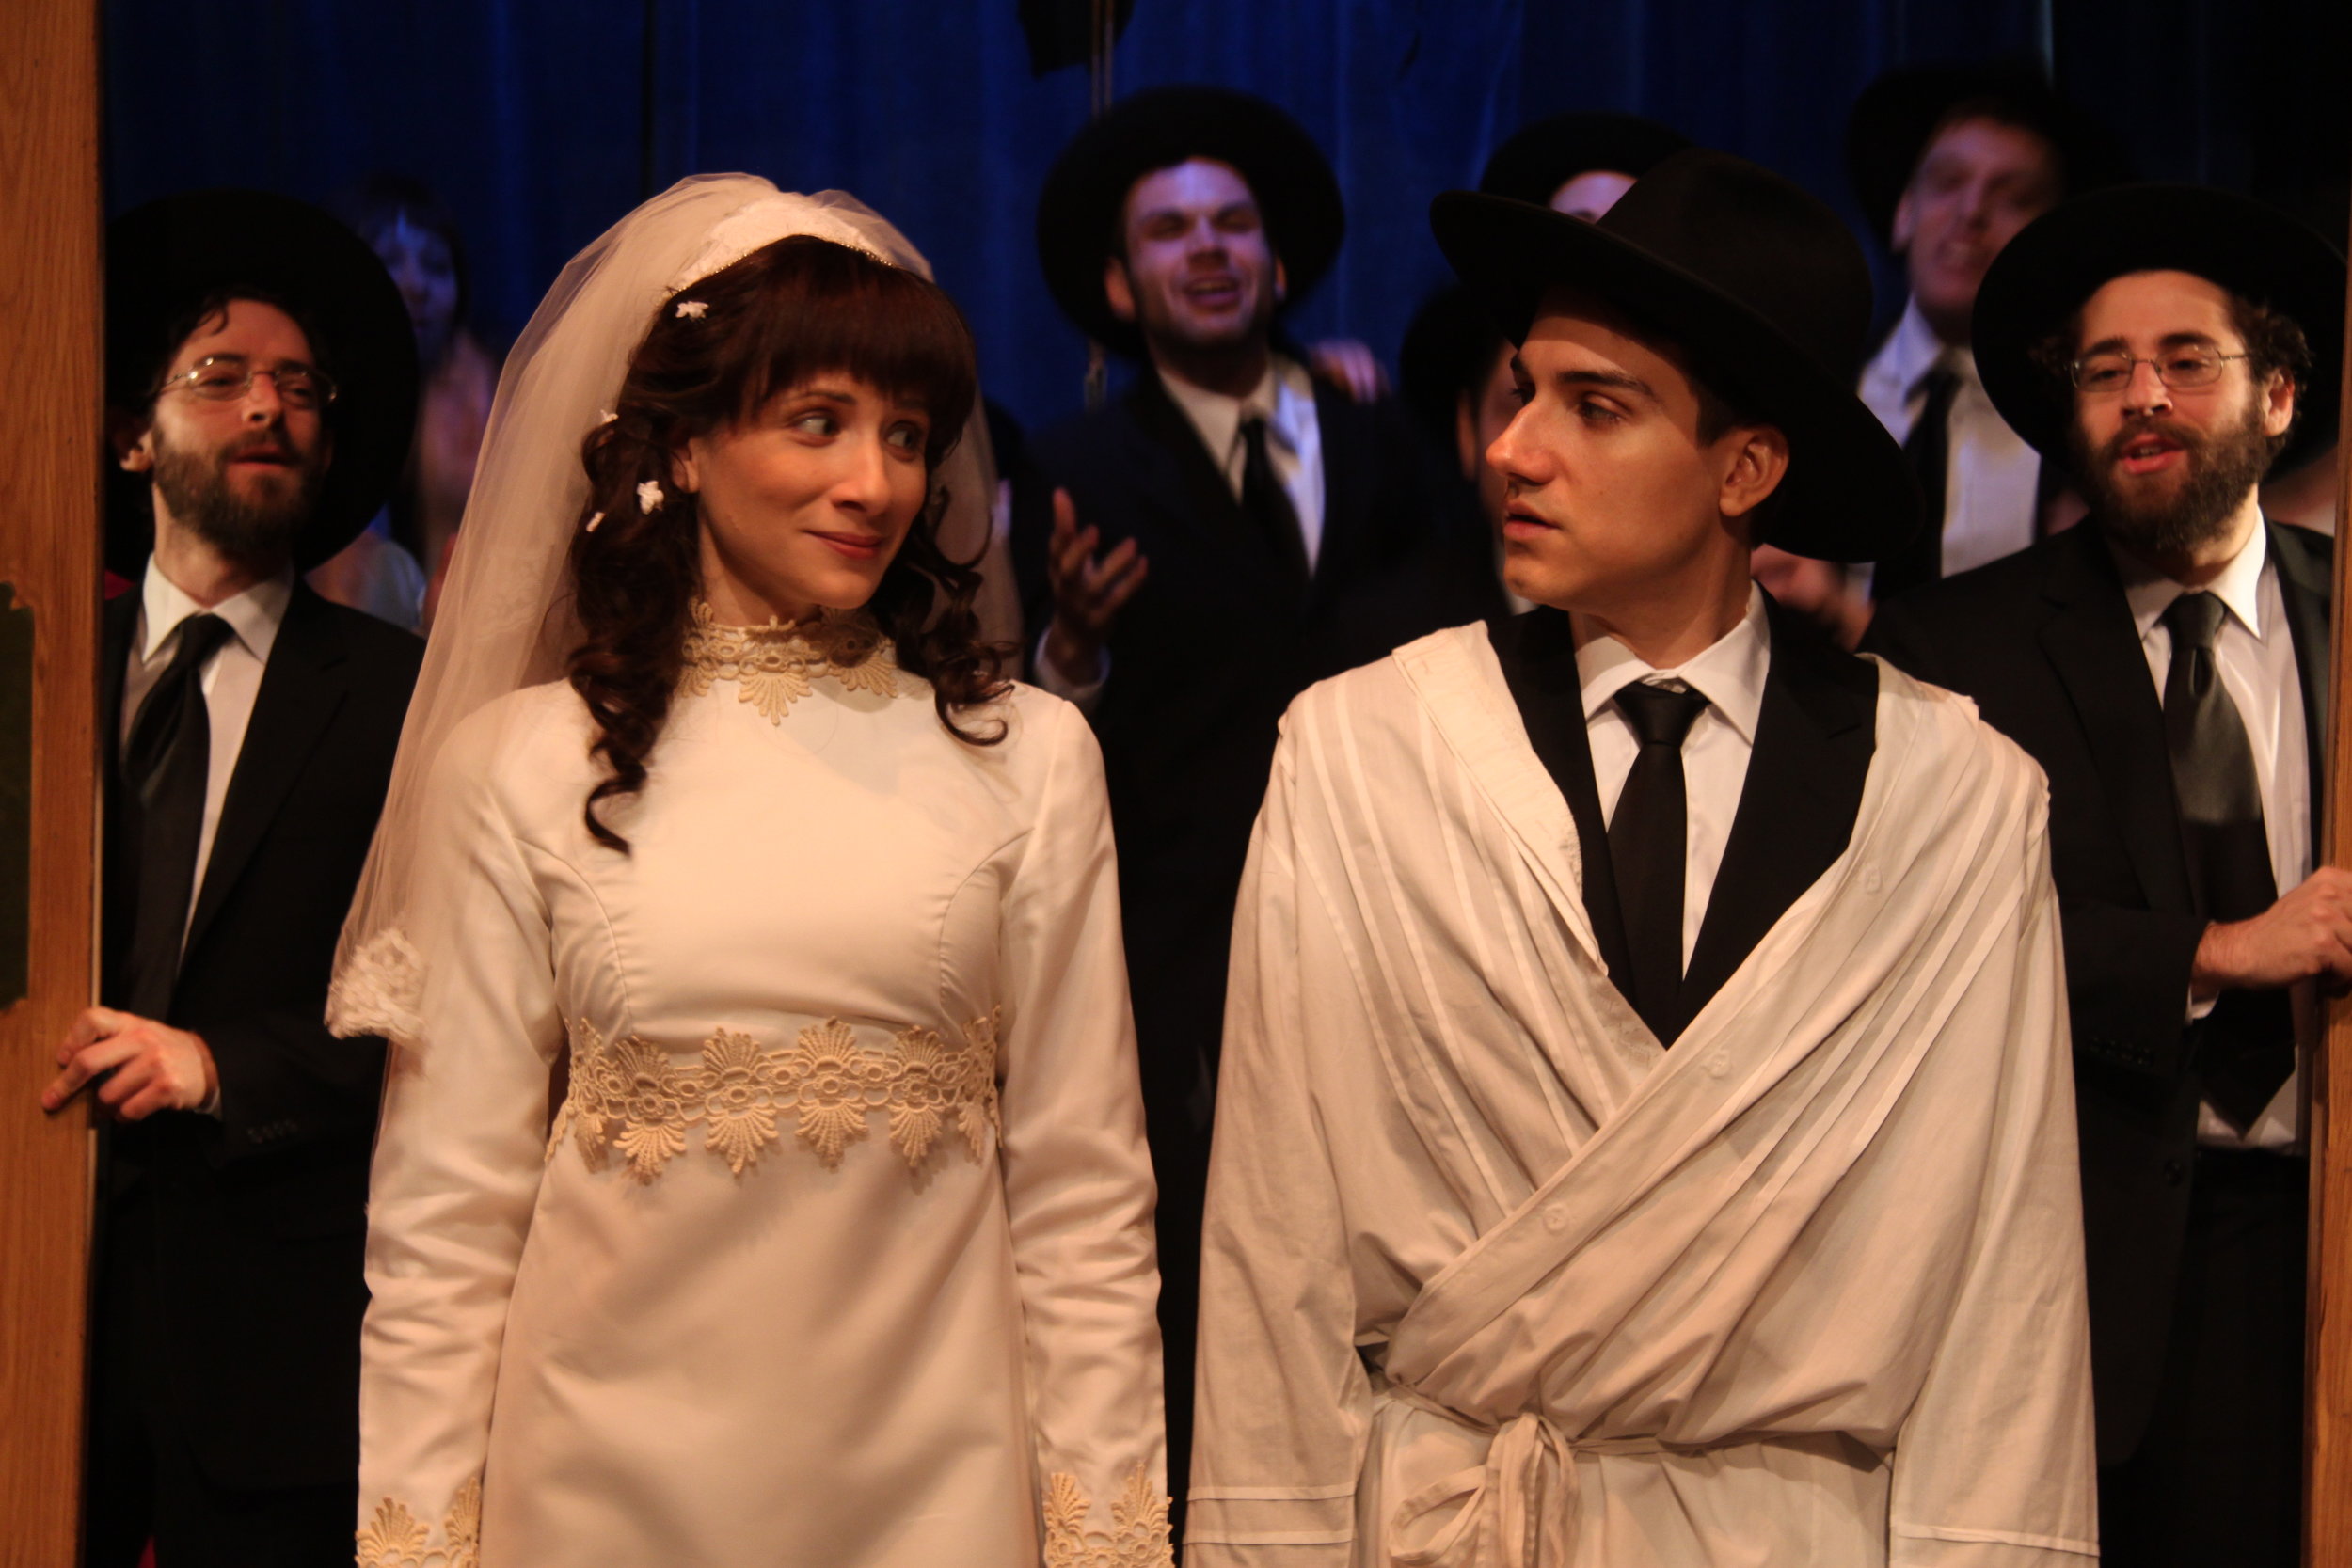  Julie Tepperman as Rachel and Aaron Willis as Chaim with members of the Cast in YICHUD (Seclusion)  